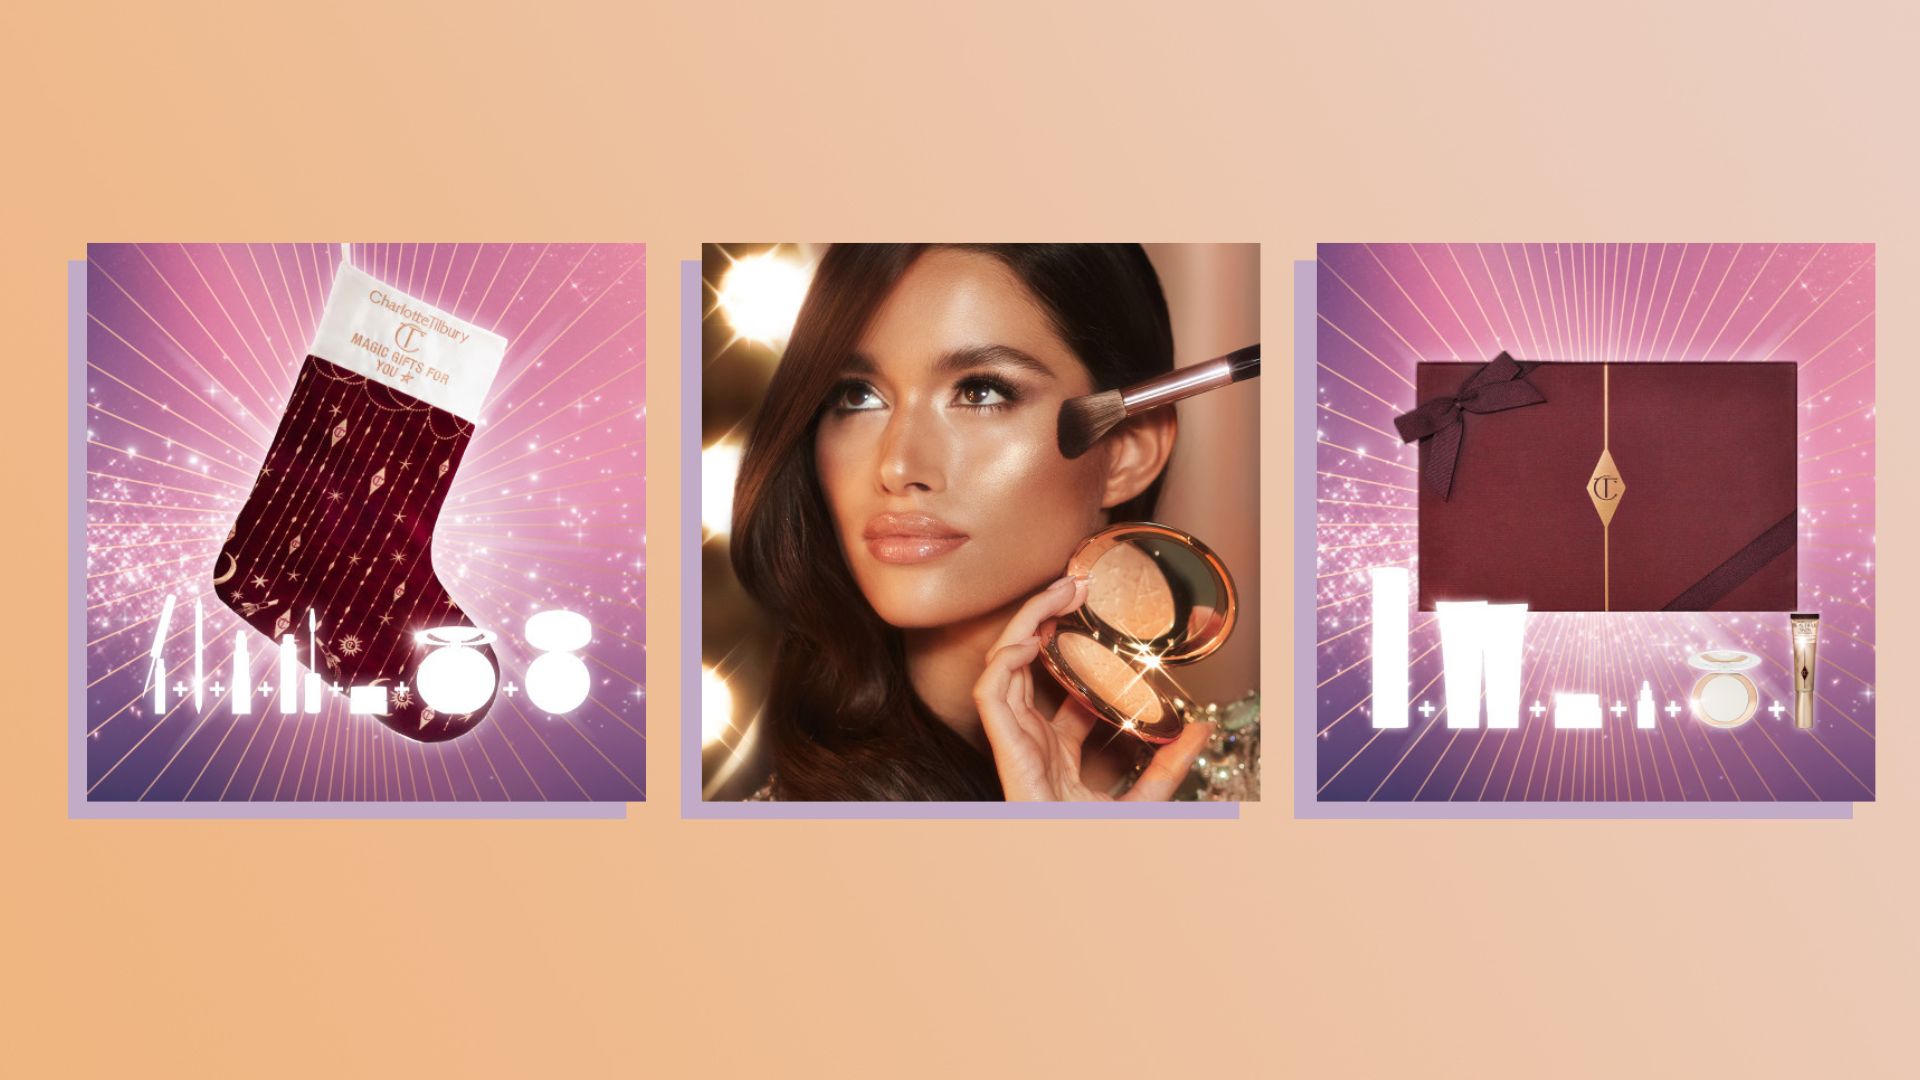 Charlotte Tilbury Mystery Box is back for Christmas with Mystery Stocking